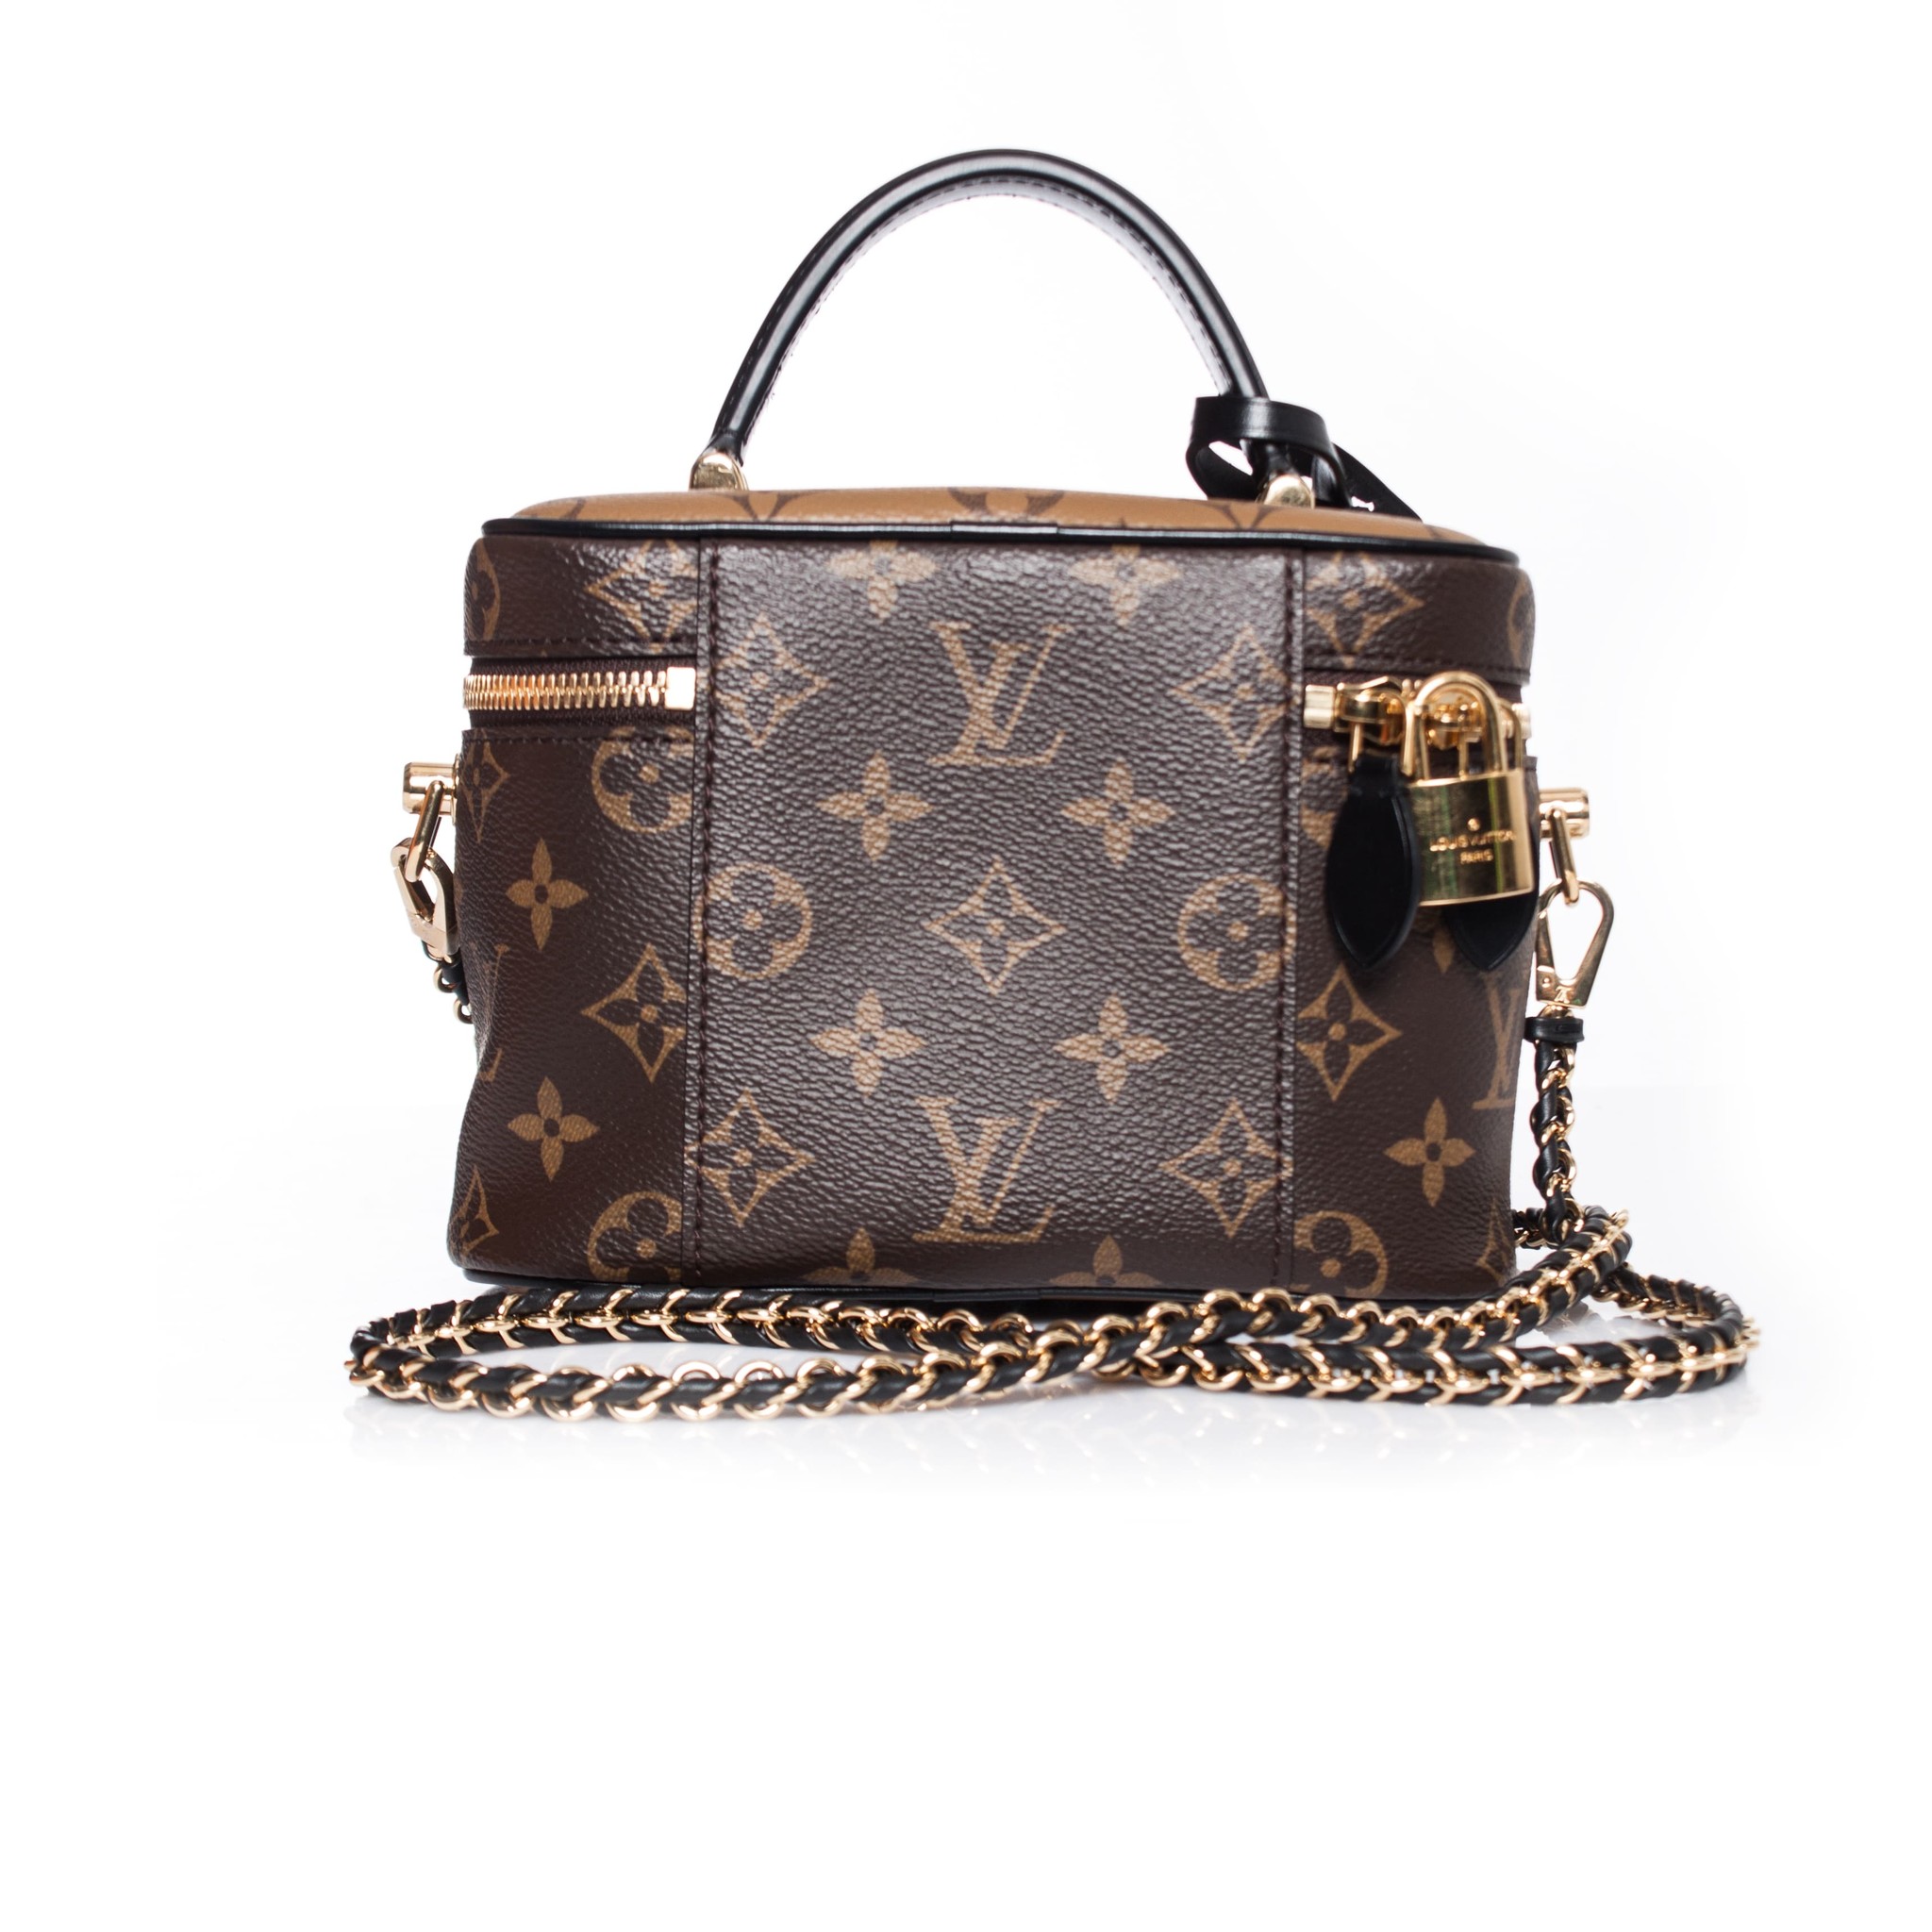 GET DRESSED WITH ME x HANDBAG OF THE DAY  LOUIS VUITTON VANITY PM  #marquitalvluxury #shorts #luxury 